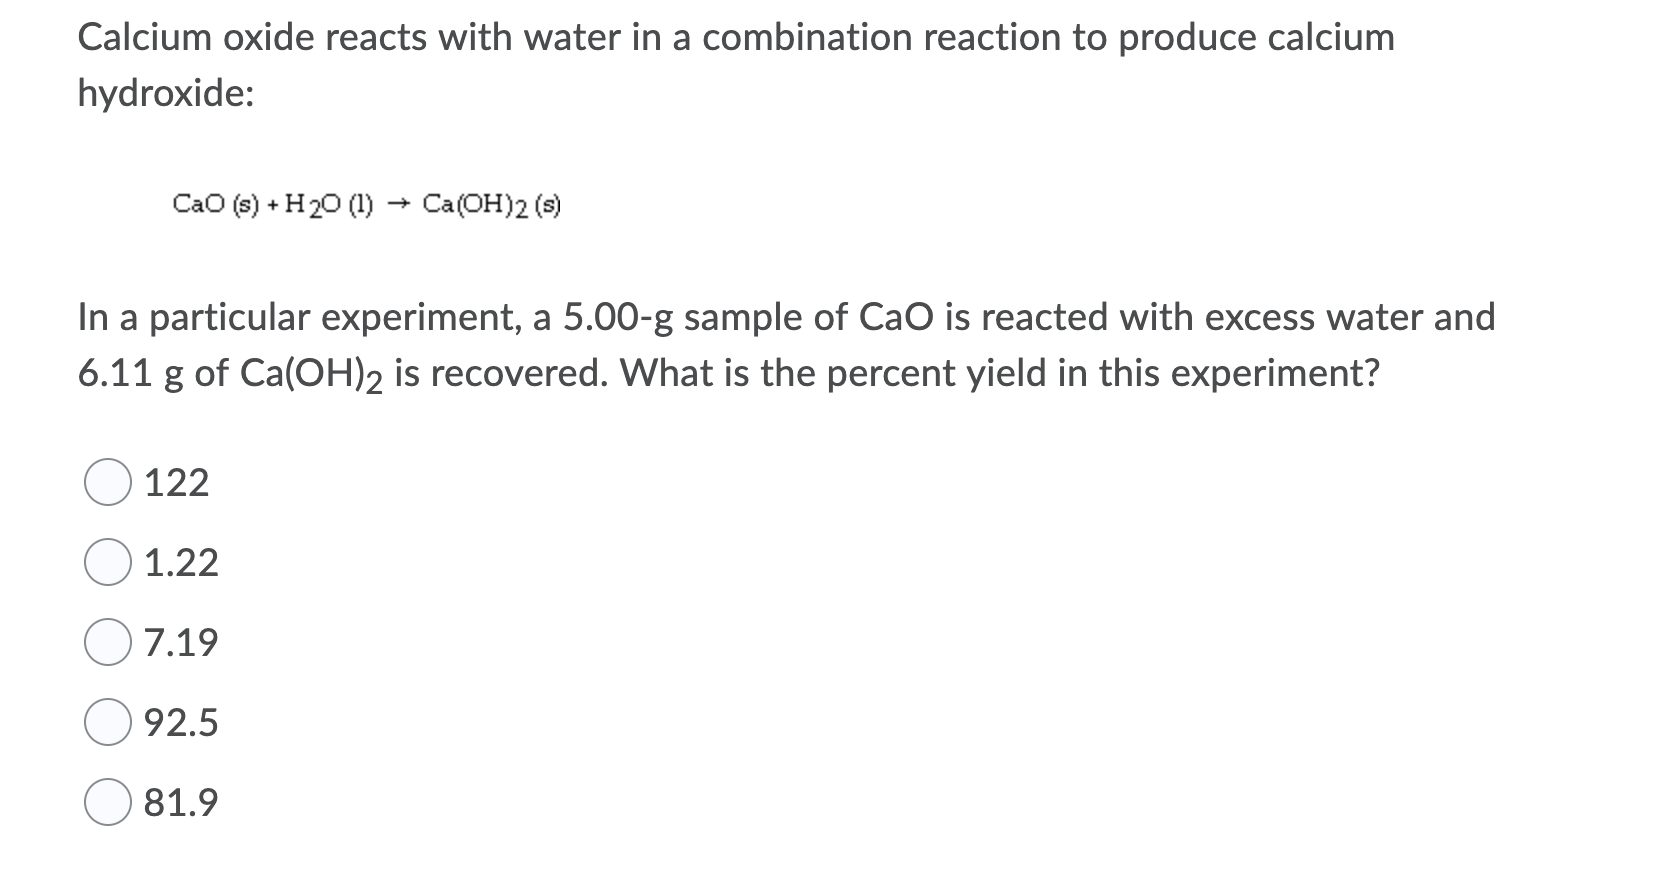 Calcium oxide reacts with water in a combination reaction to produce calcium
hydroxide:
CaO (s) + H20 (1) → Ca(OH)2 (s)
In a particular experiment, a 5.00-g sample of CaO is reacted with excess water and
6.11 g of Ca(OH)2 is recovered. What is the percent yield in this experiment?
122
1.22
7.19
92.5
81.9
